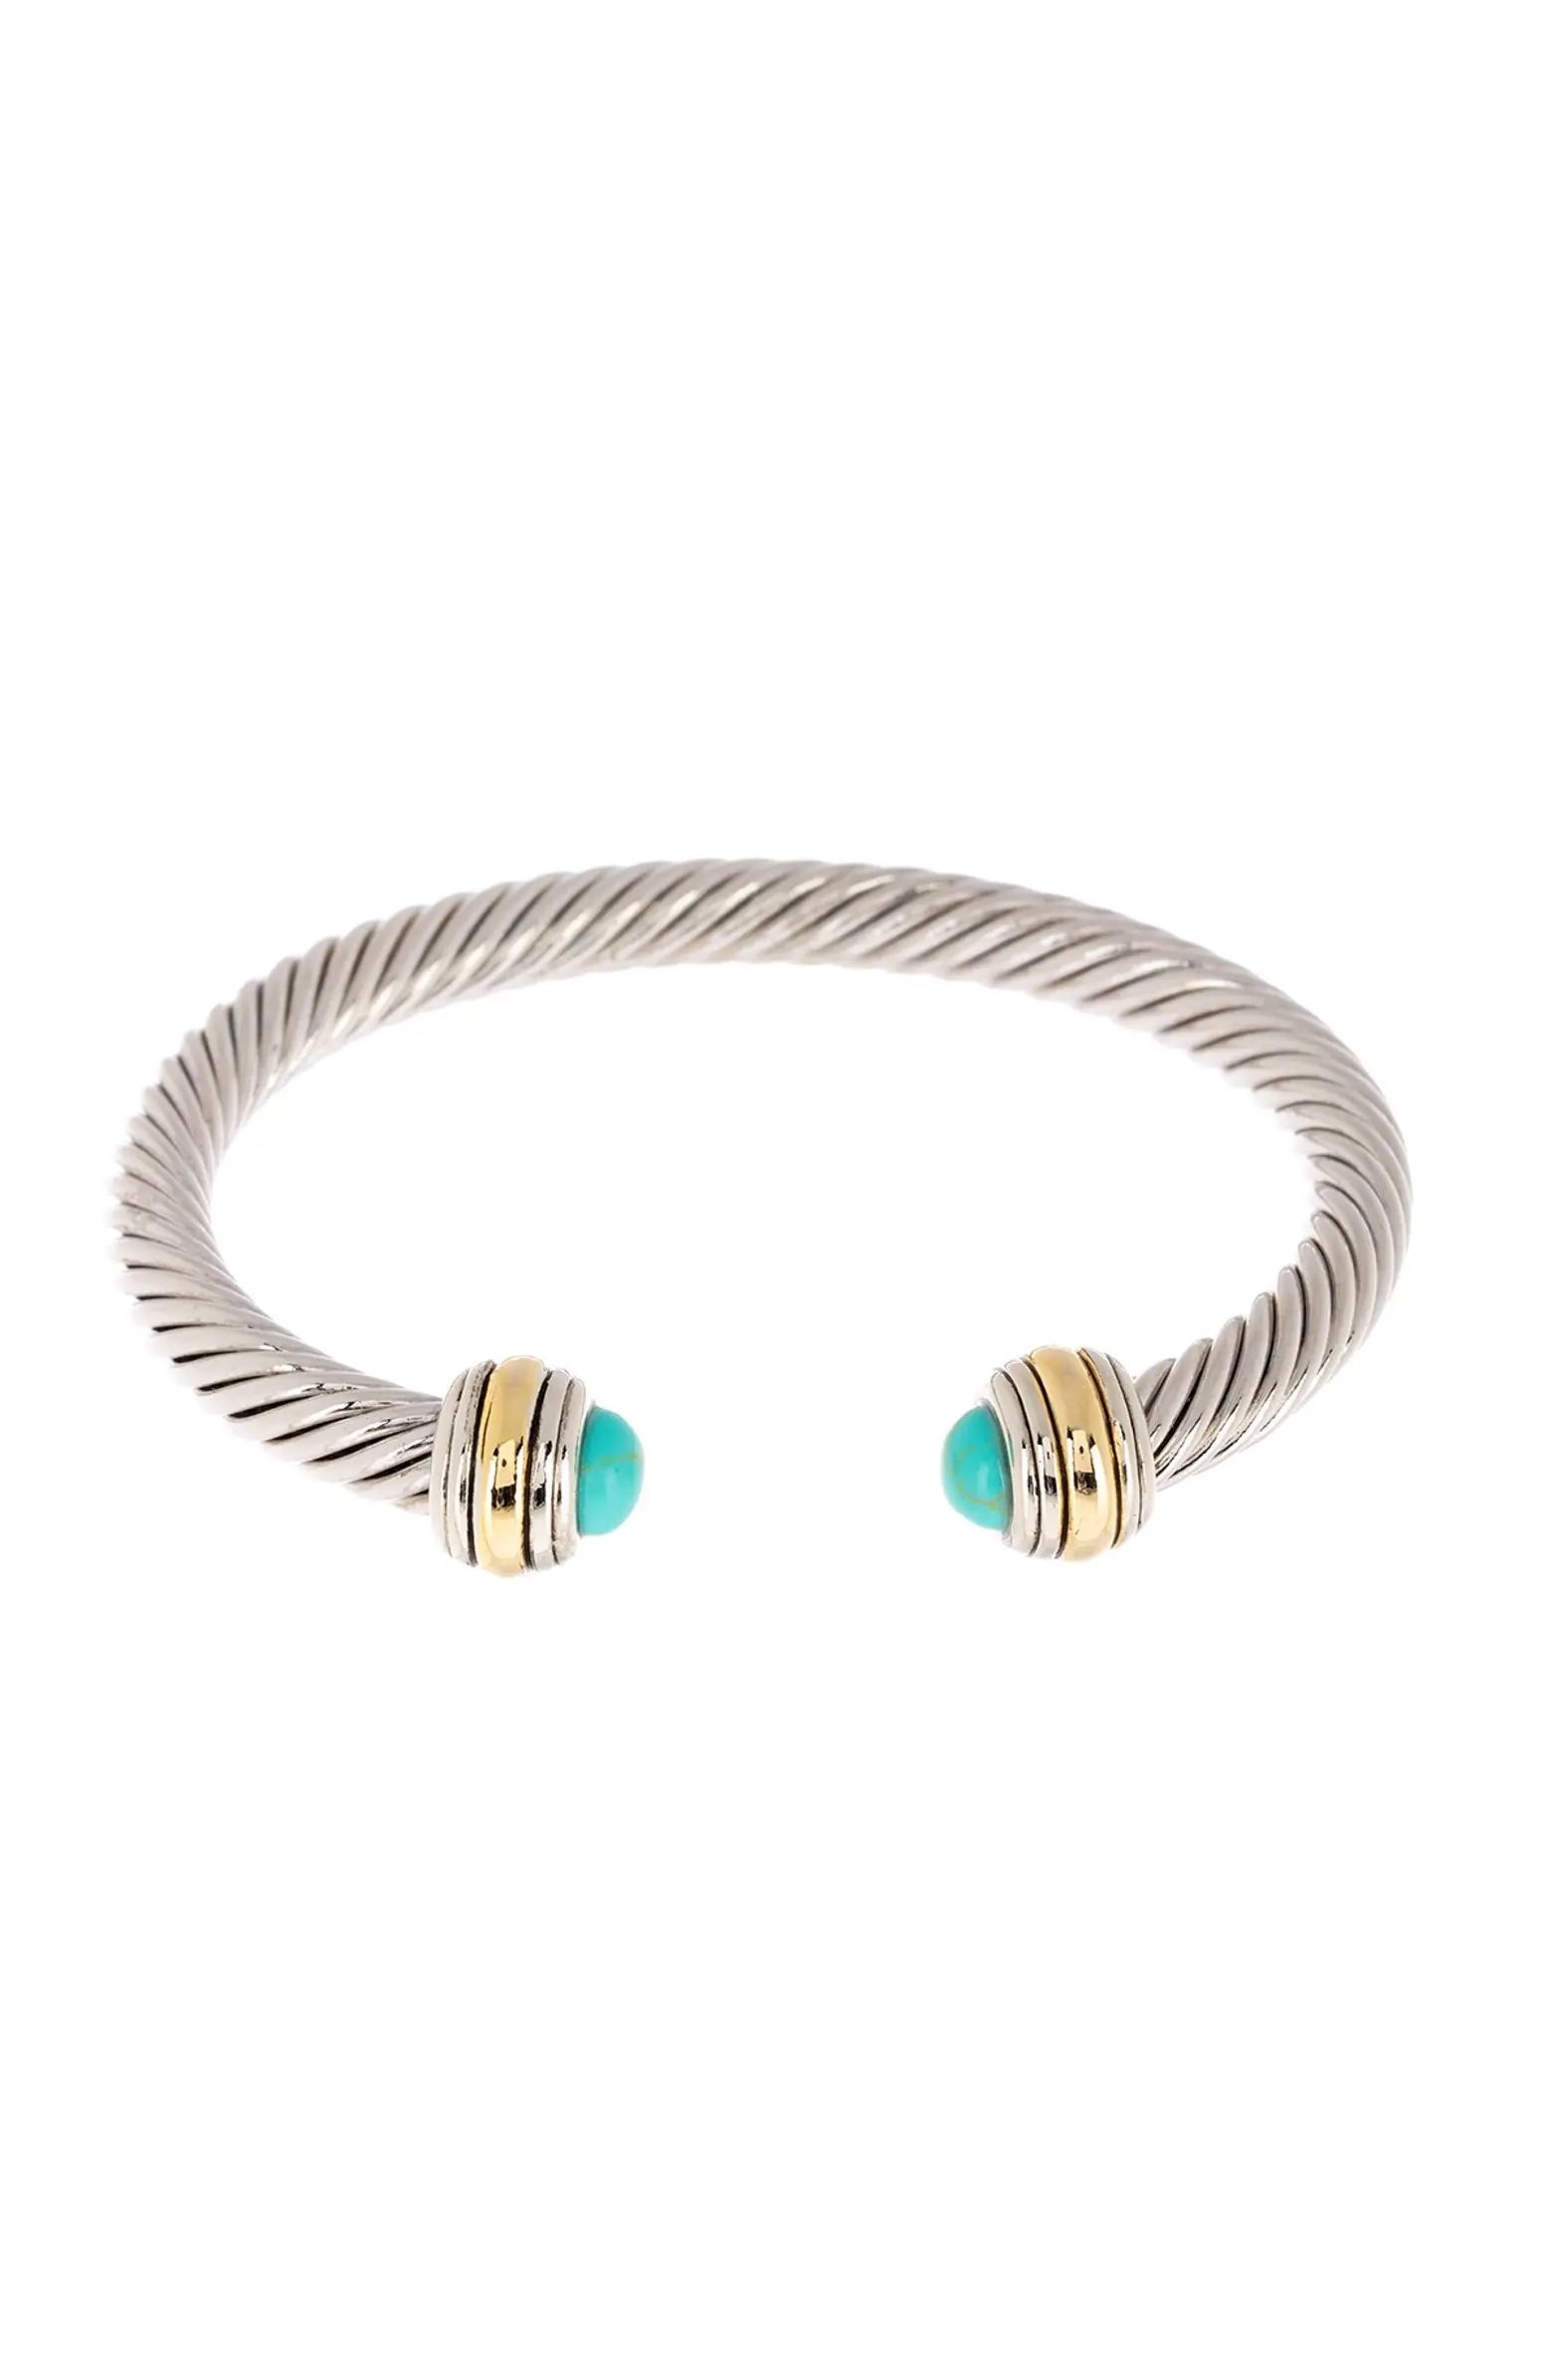 MESHMERISE Two-Tone Twisted Cable Turquoise Cuff Bracelet | Nordstromrack | Nordstrom Rack